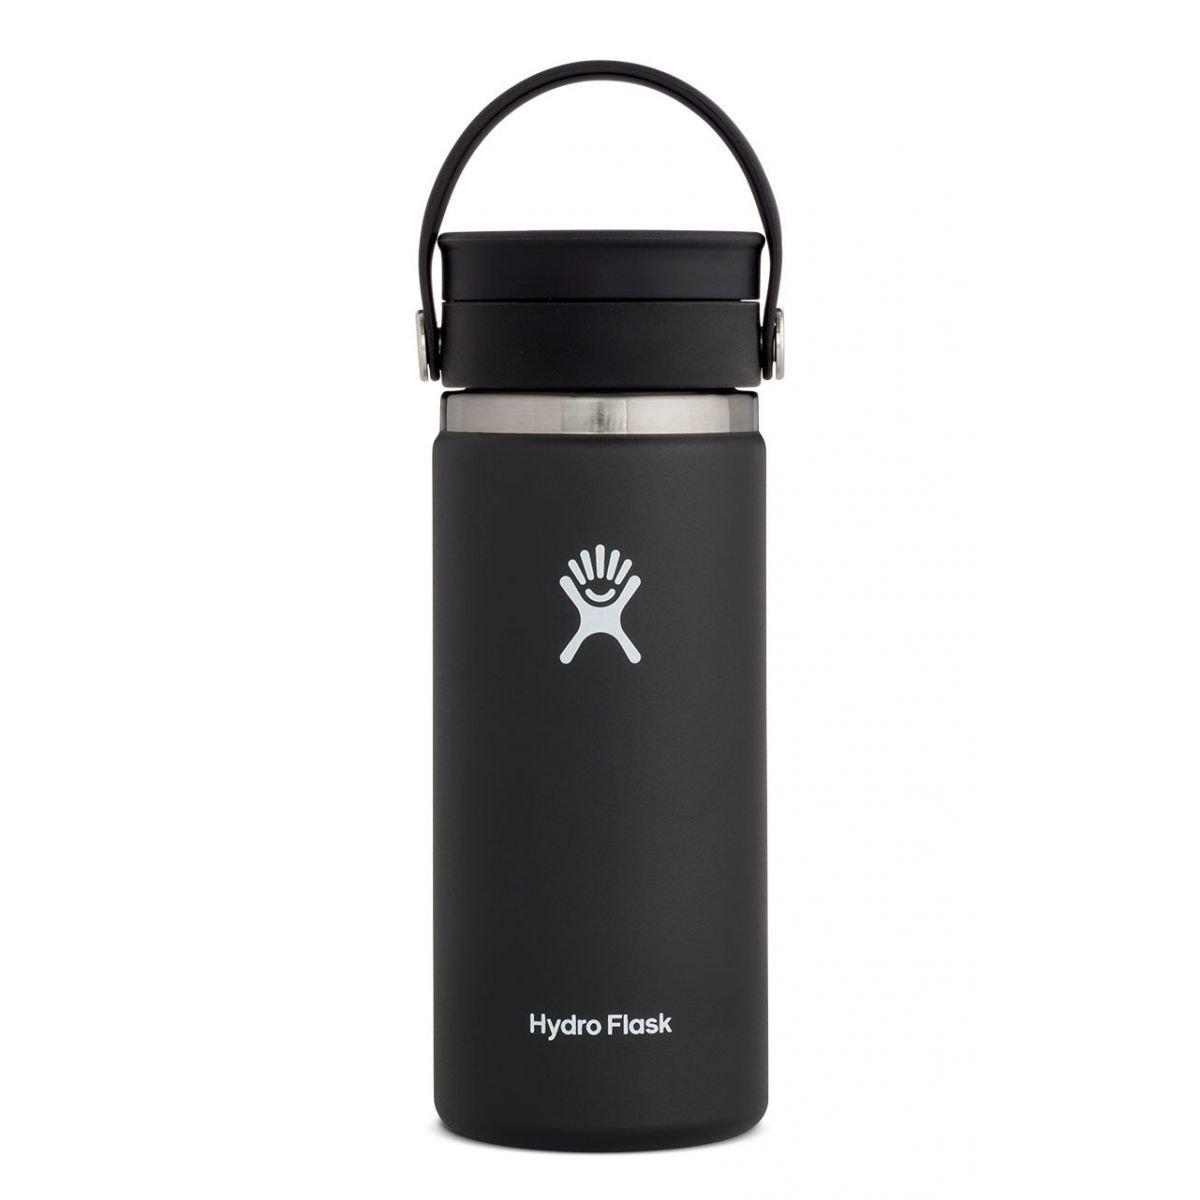 Hydro Flask 16oz Wide Mouth Coffee